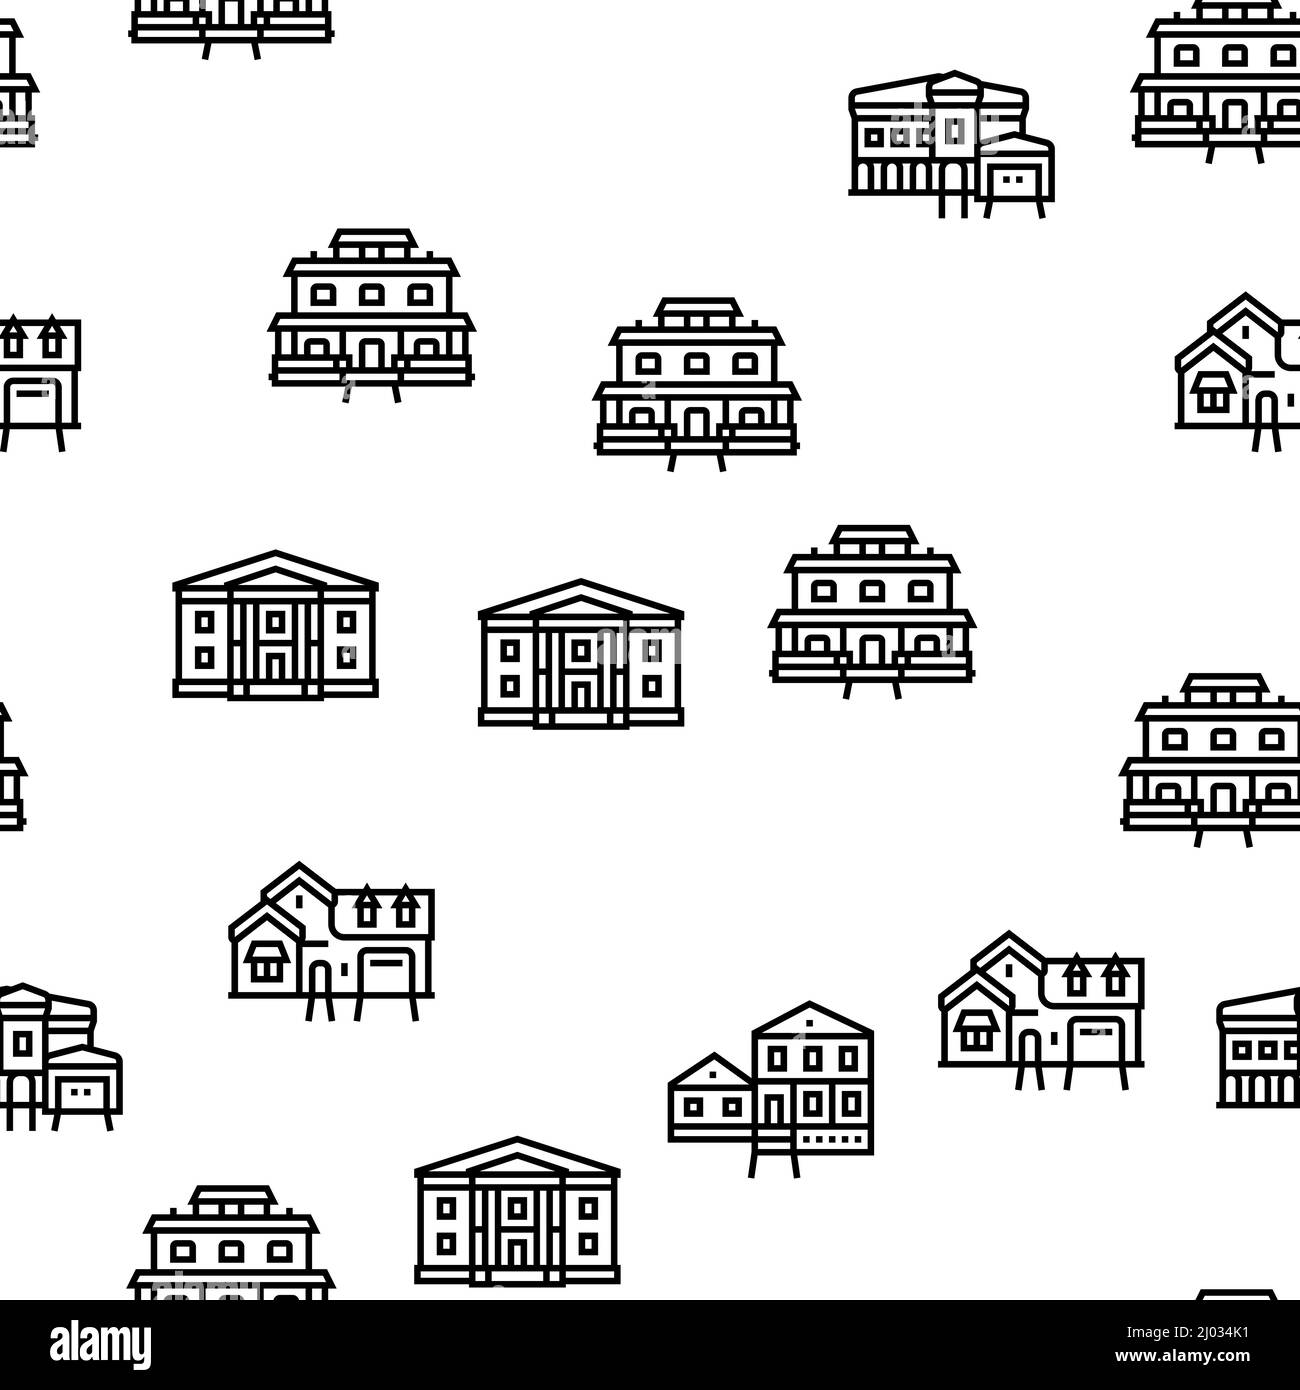 House Architectural Exterior Vector Seamless Pattern Stock Vector